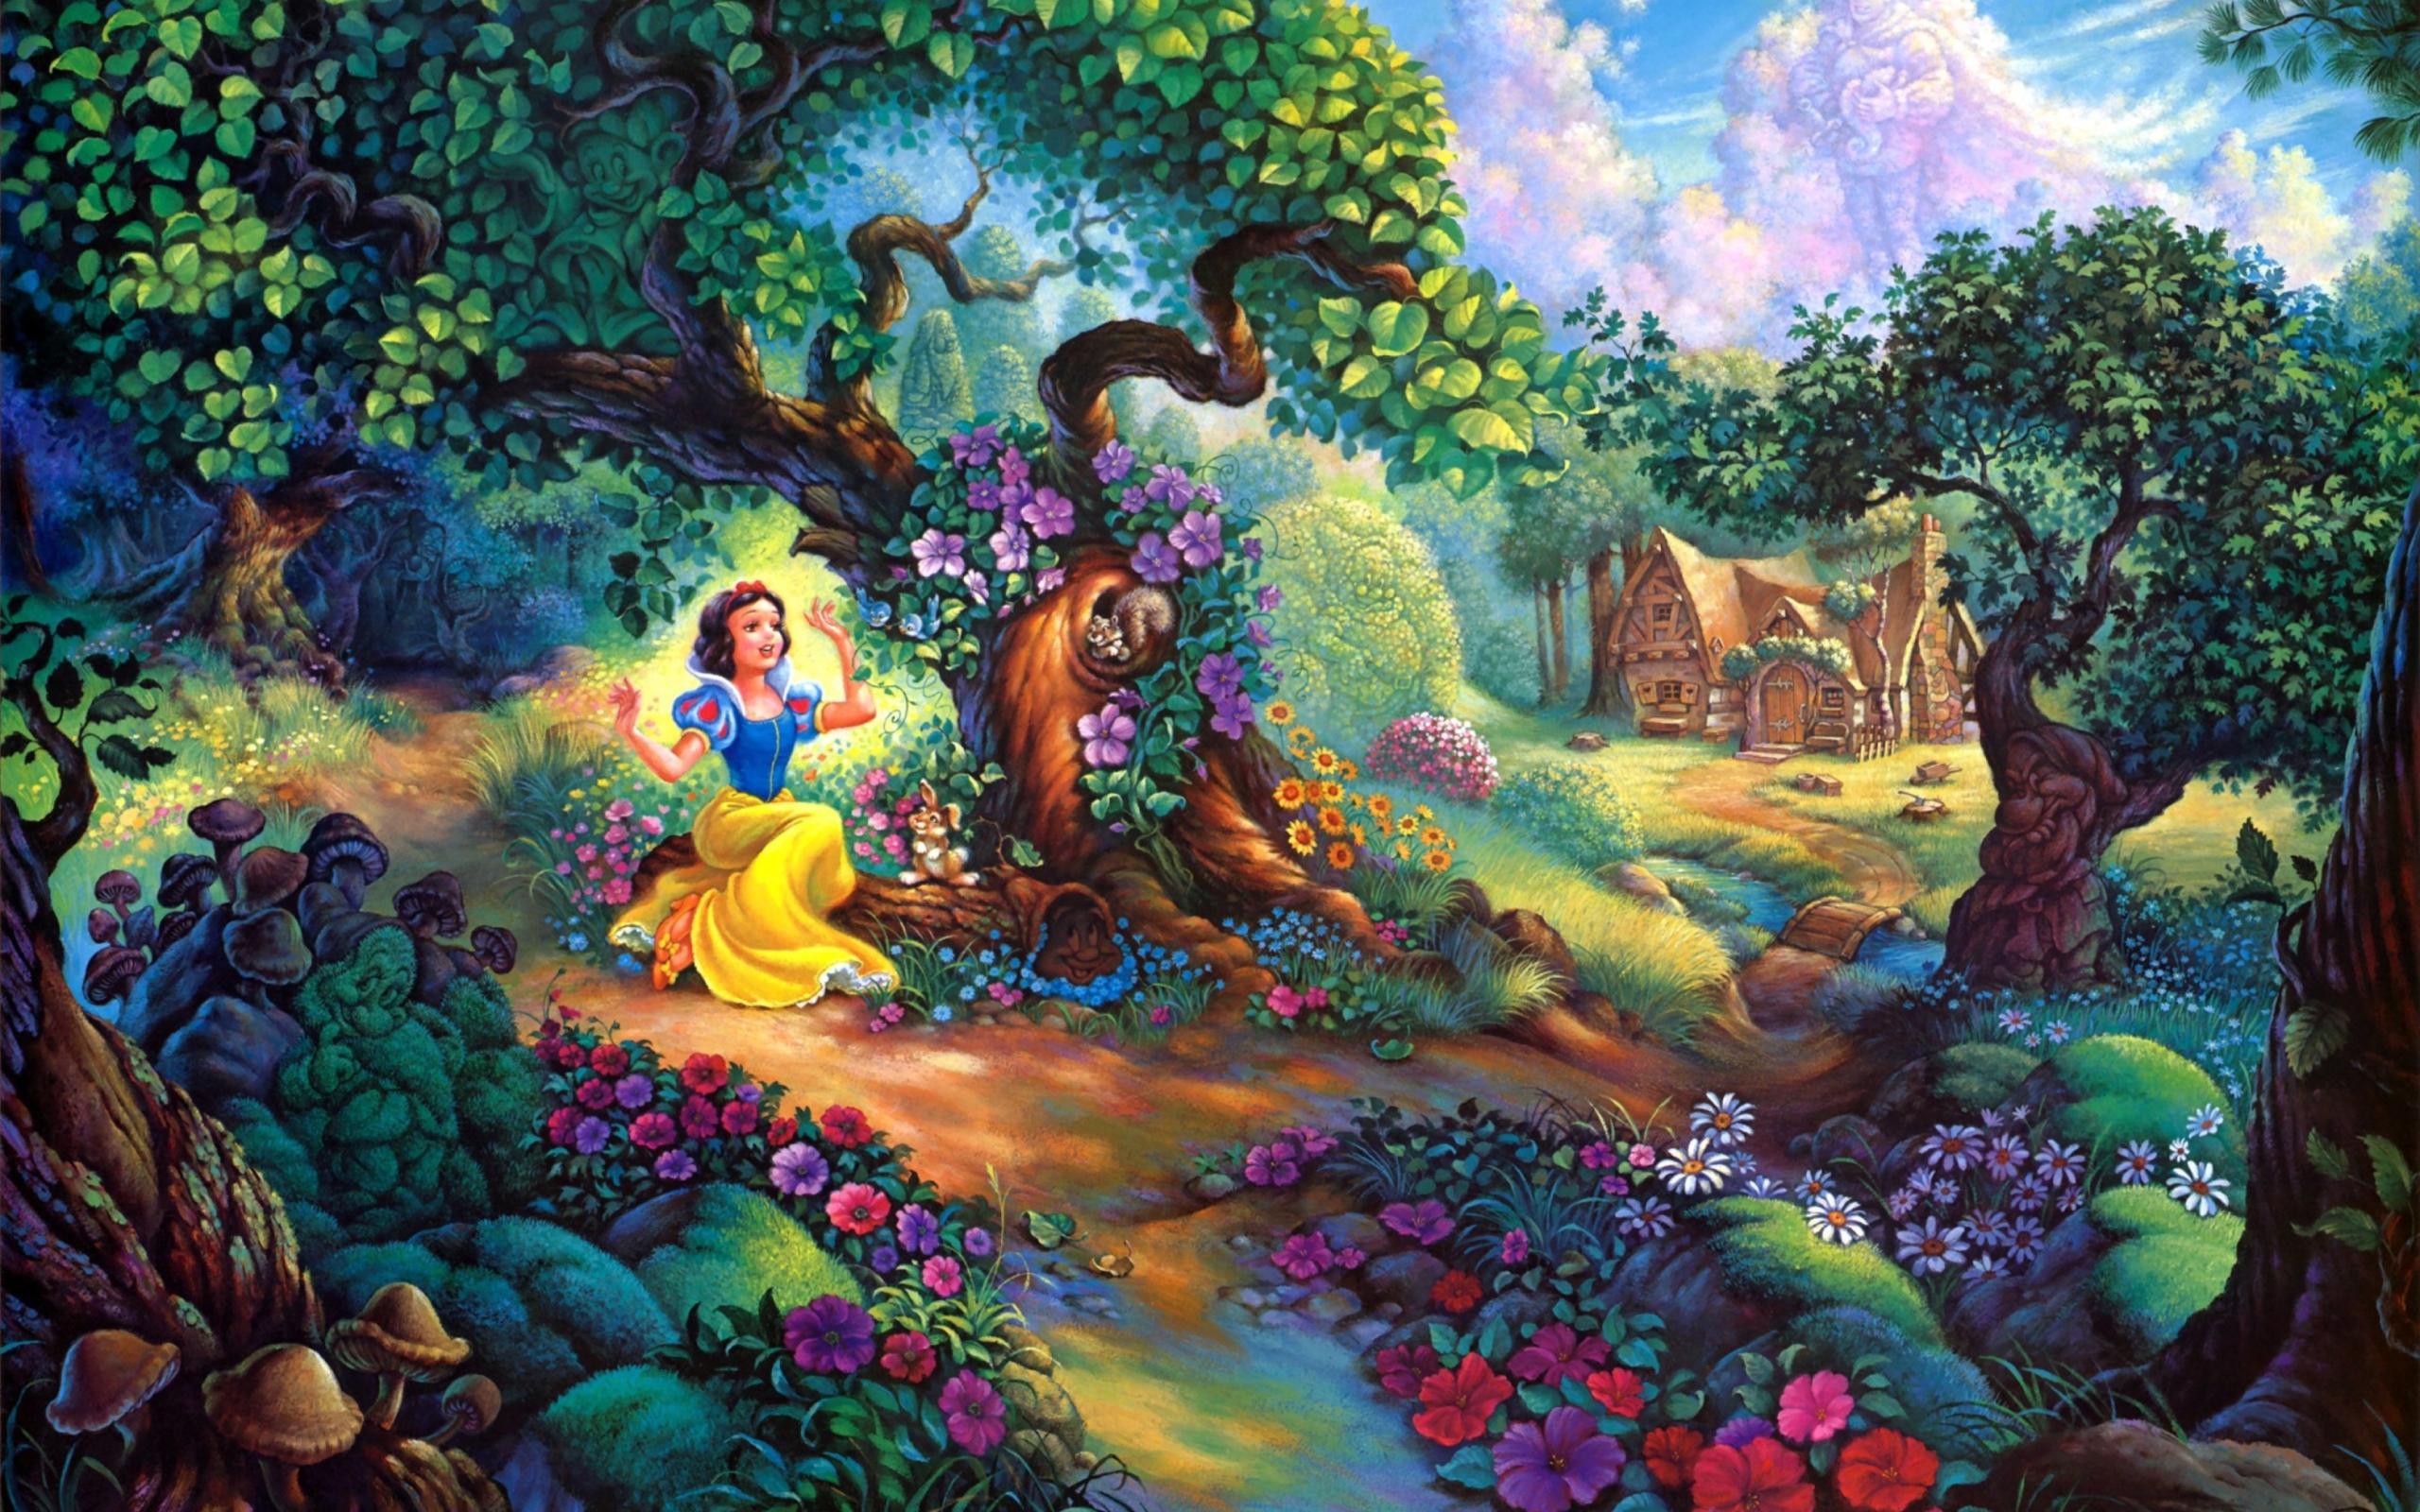 Das Snow White In Magical Forest Wallpaper 2560x1600